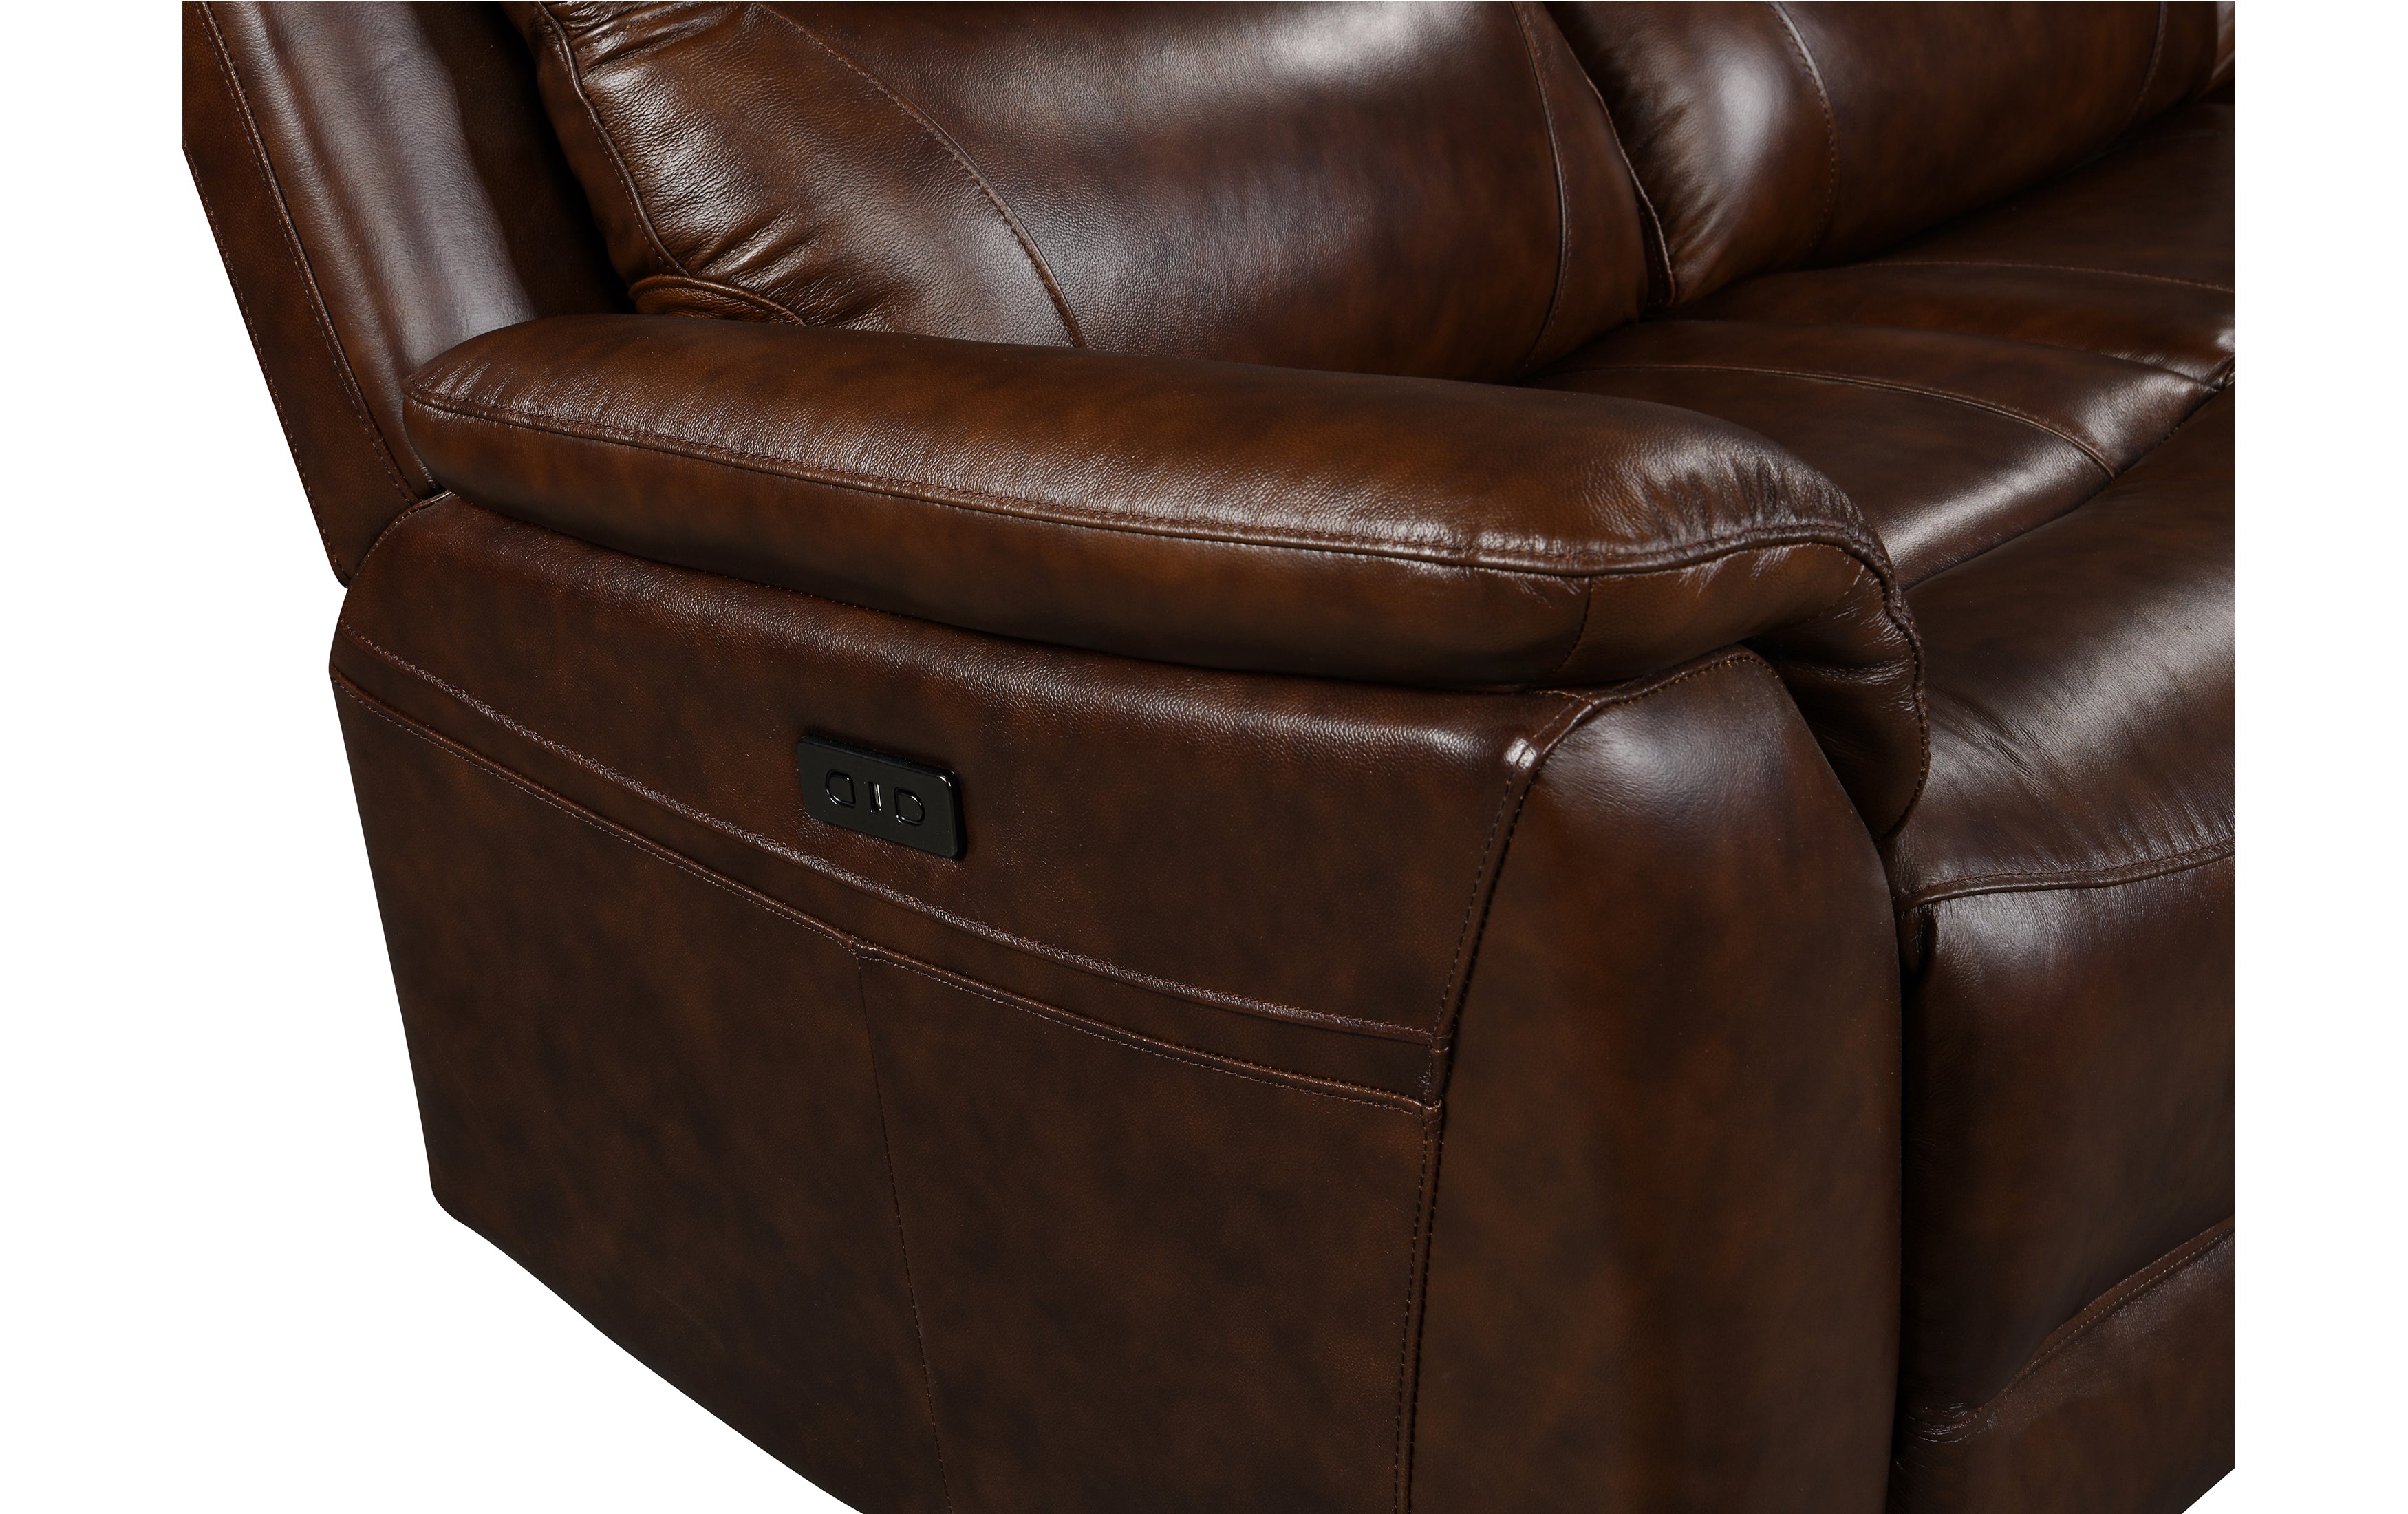 Palermo Leather 2 Seater Sofa with Power Recliner